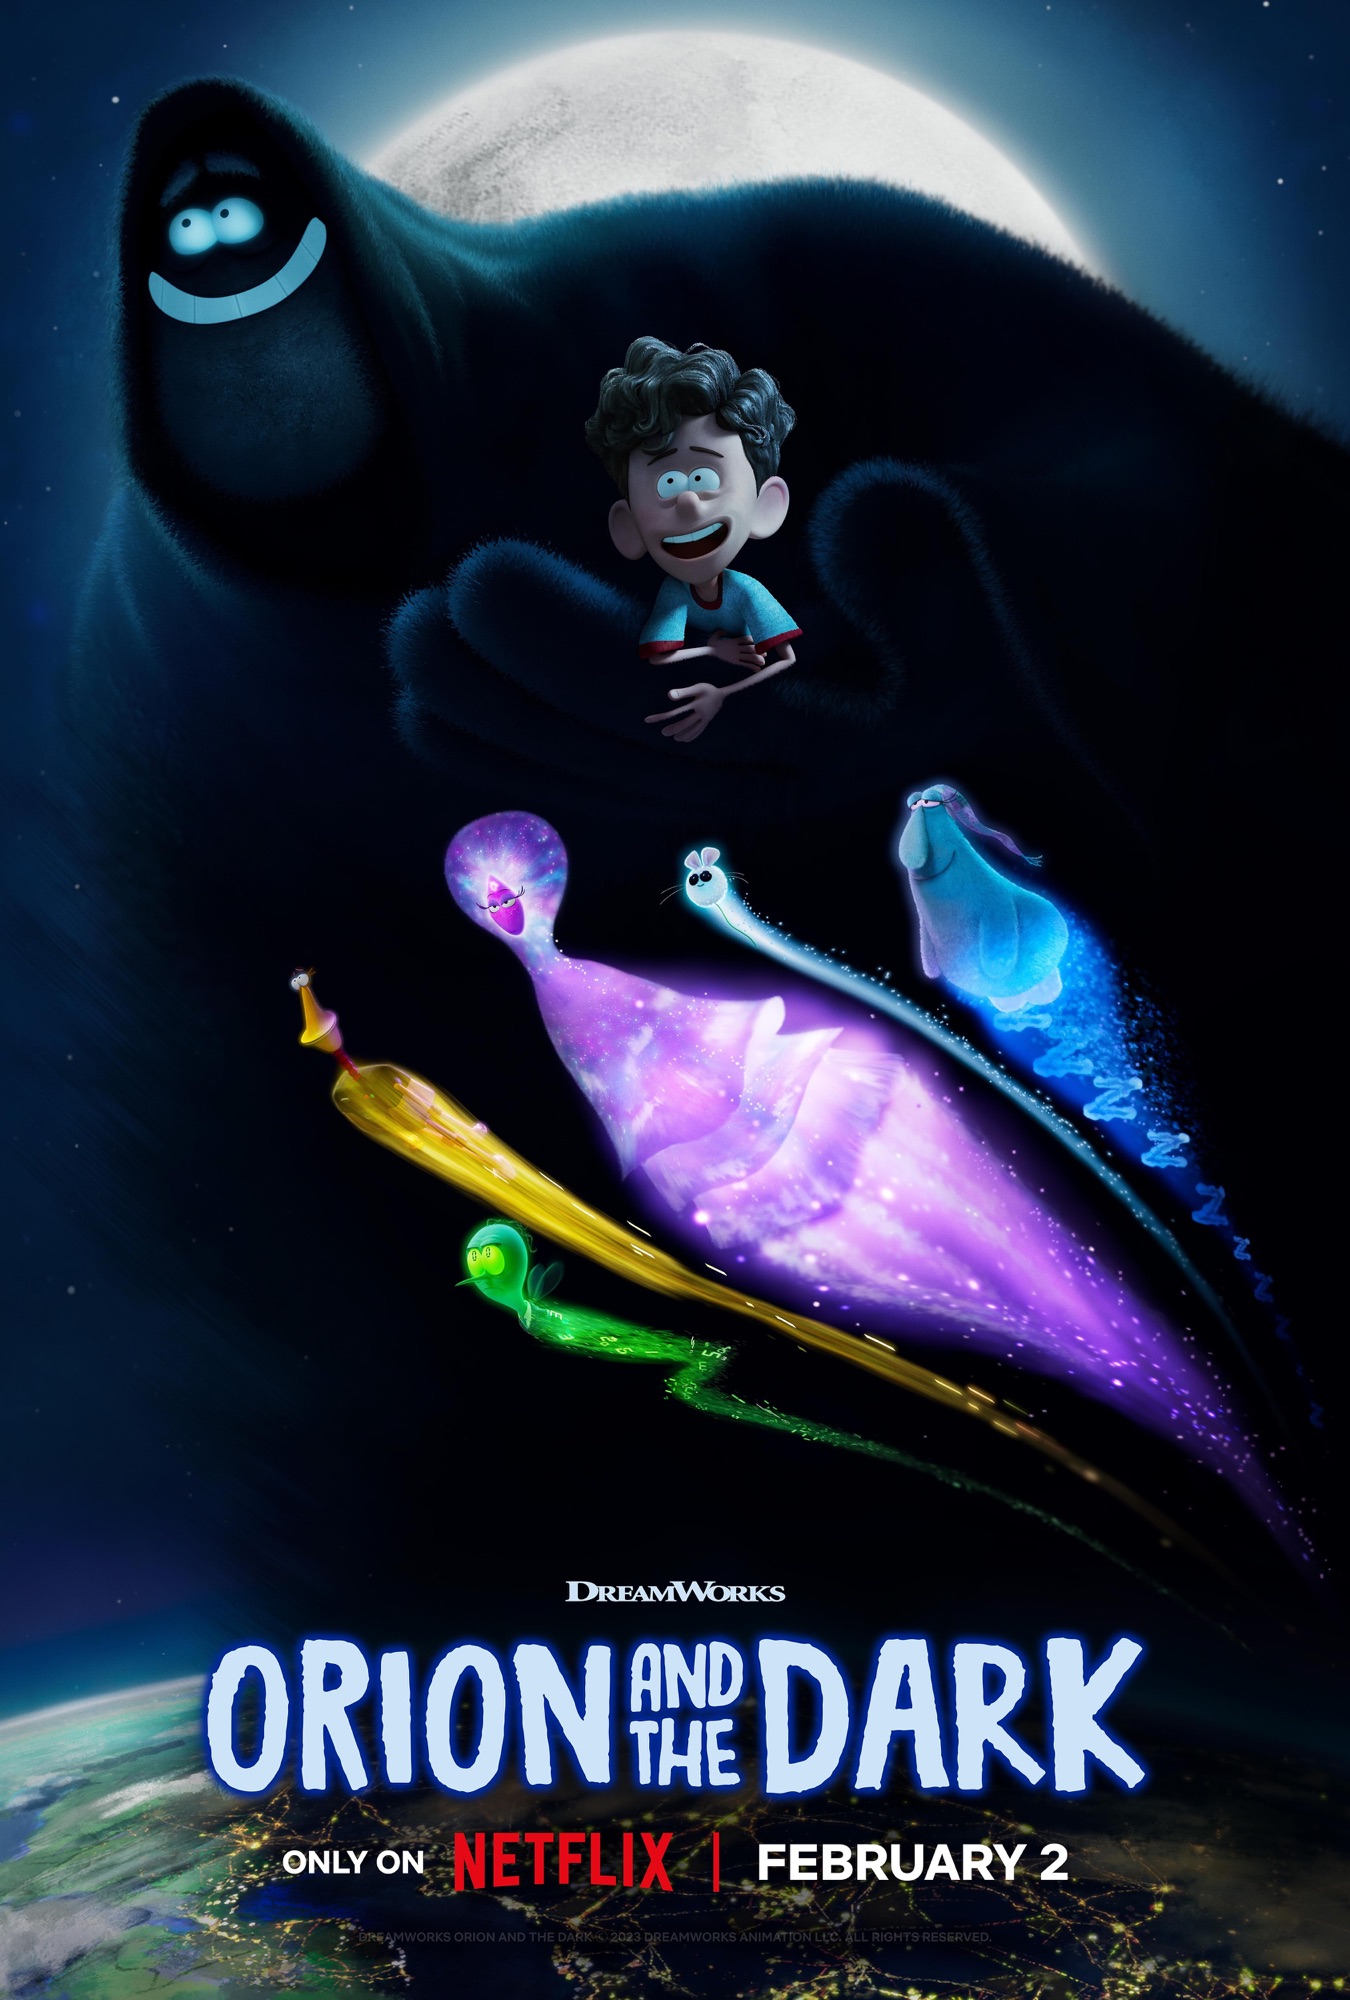 Orion and the Dark:  Confronting the Eternal Darkness of the Child’s Mind